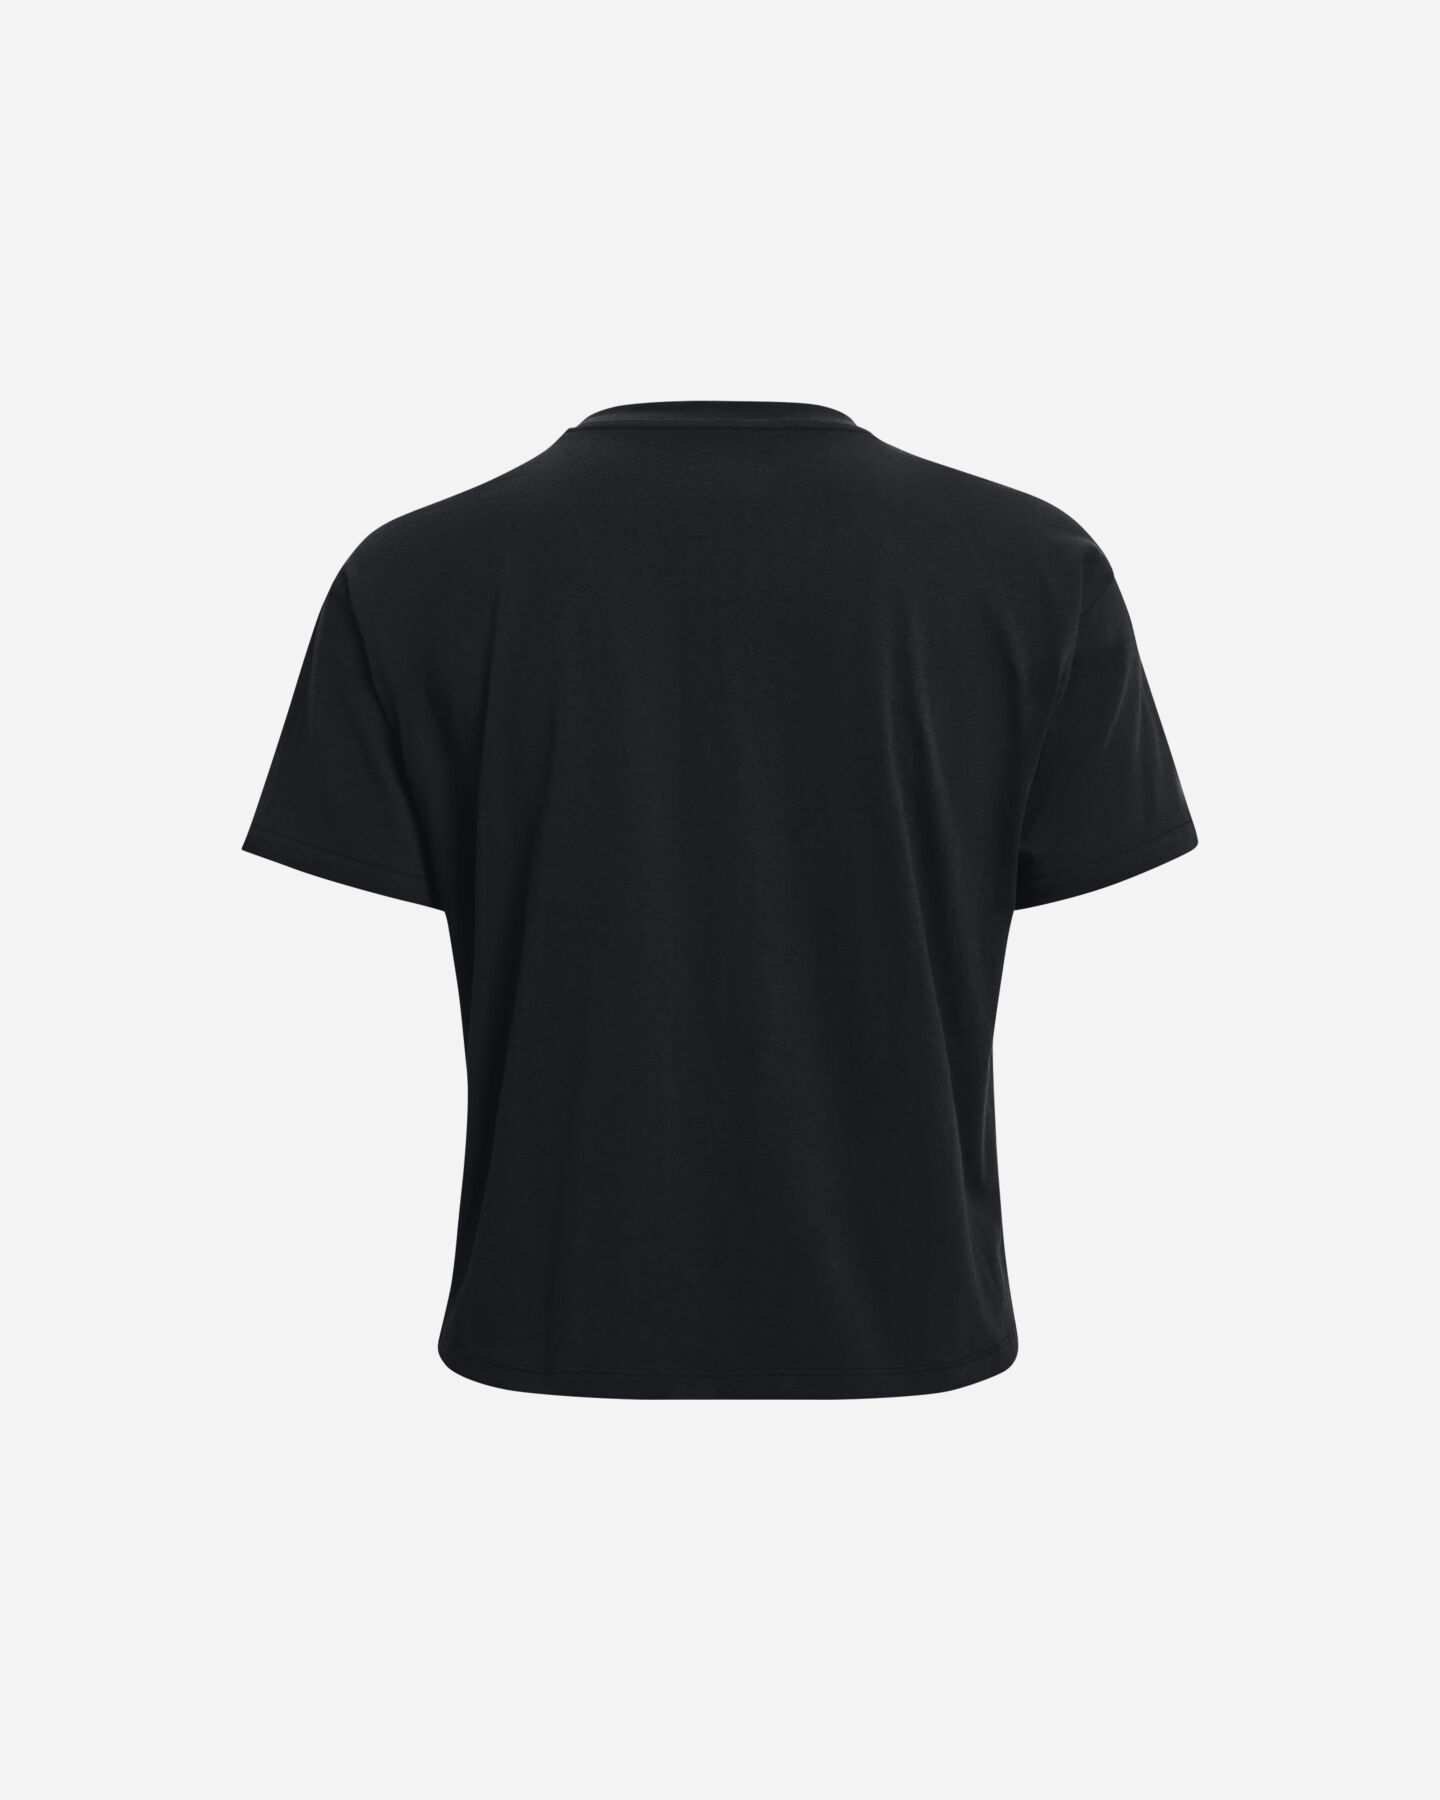  T-Shirt training UNDER ARMOUR POLY LOGO SCRITTE NERO W S5336464|0001|XS scatto 1